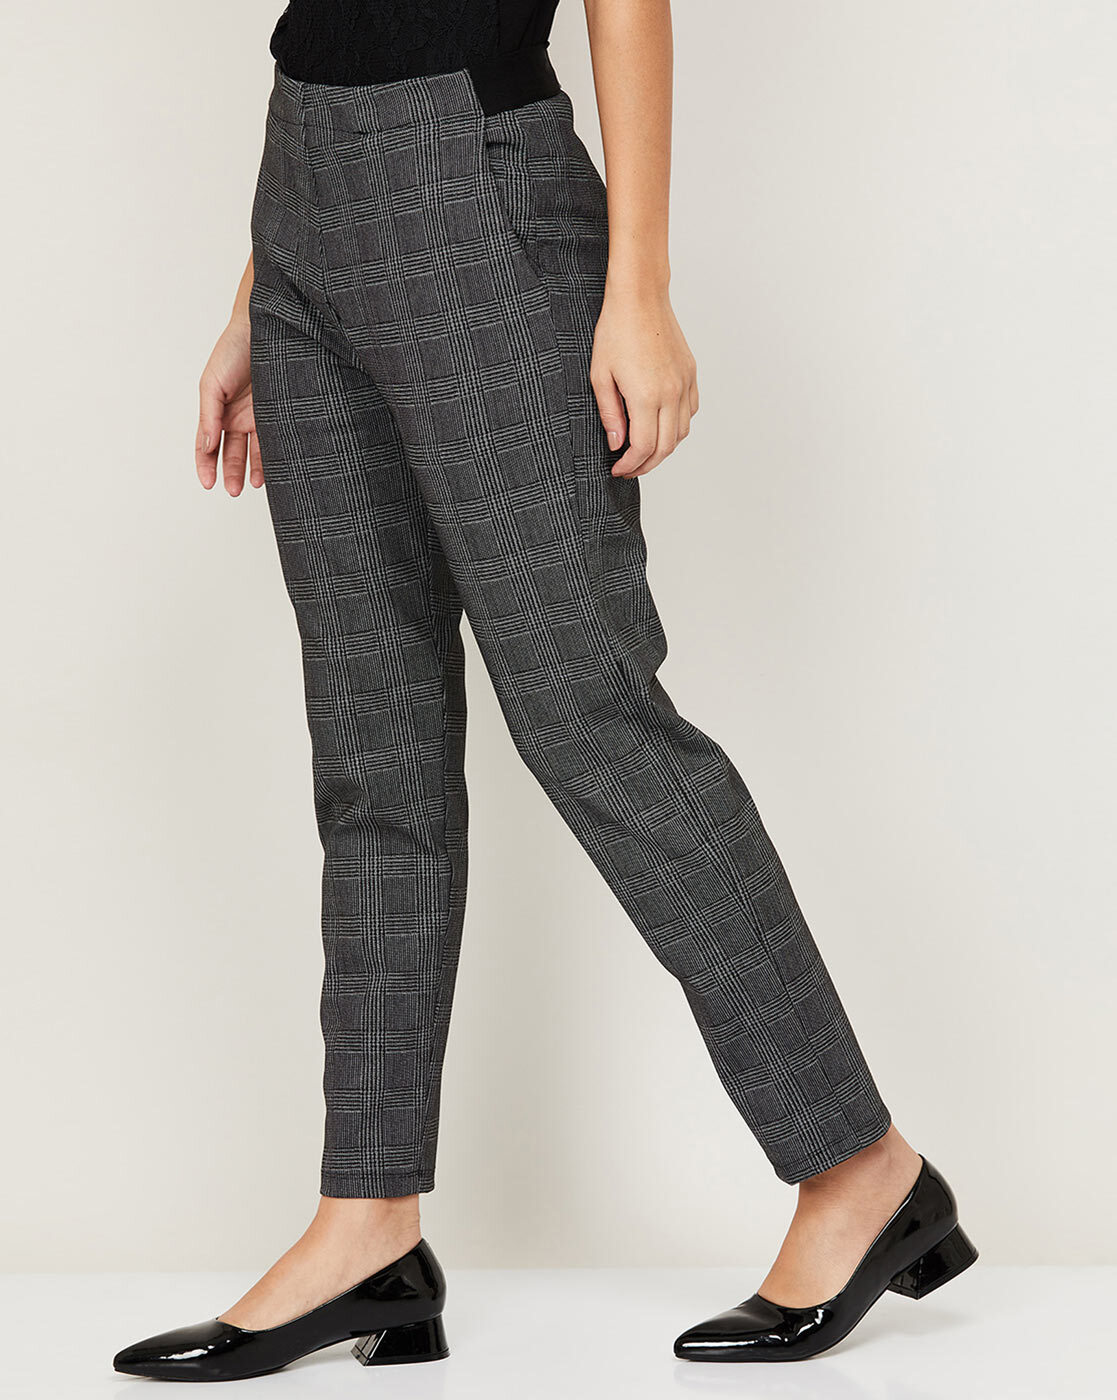 Light Grey Check Ankle-Length Formal Women Regular Fit Trousers - Selling  Fast at Pantaloons.com